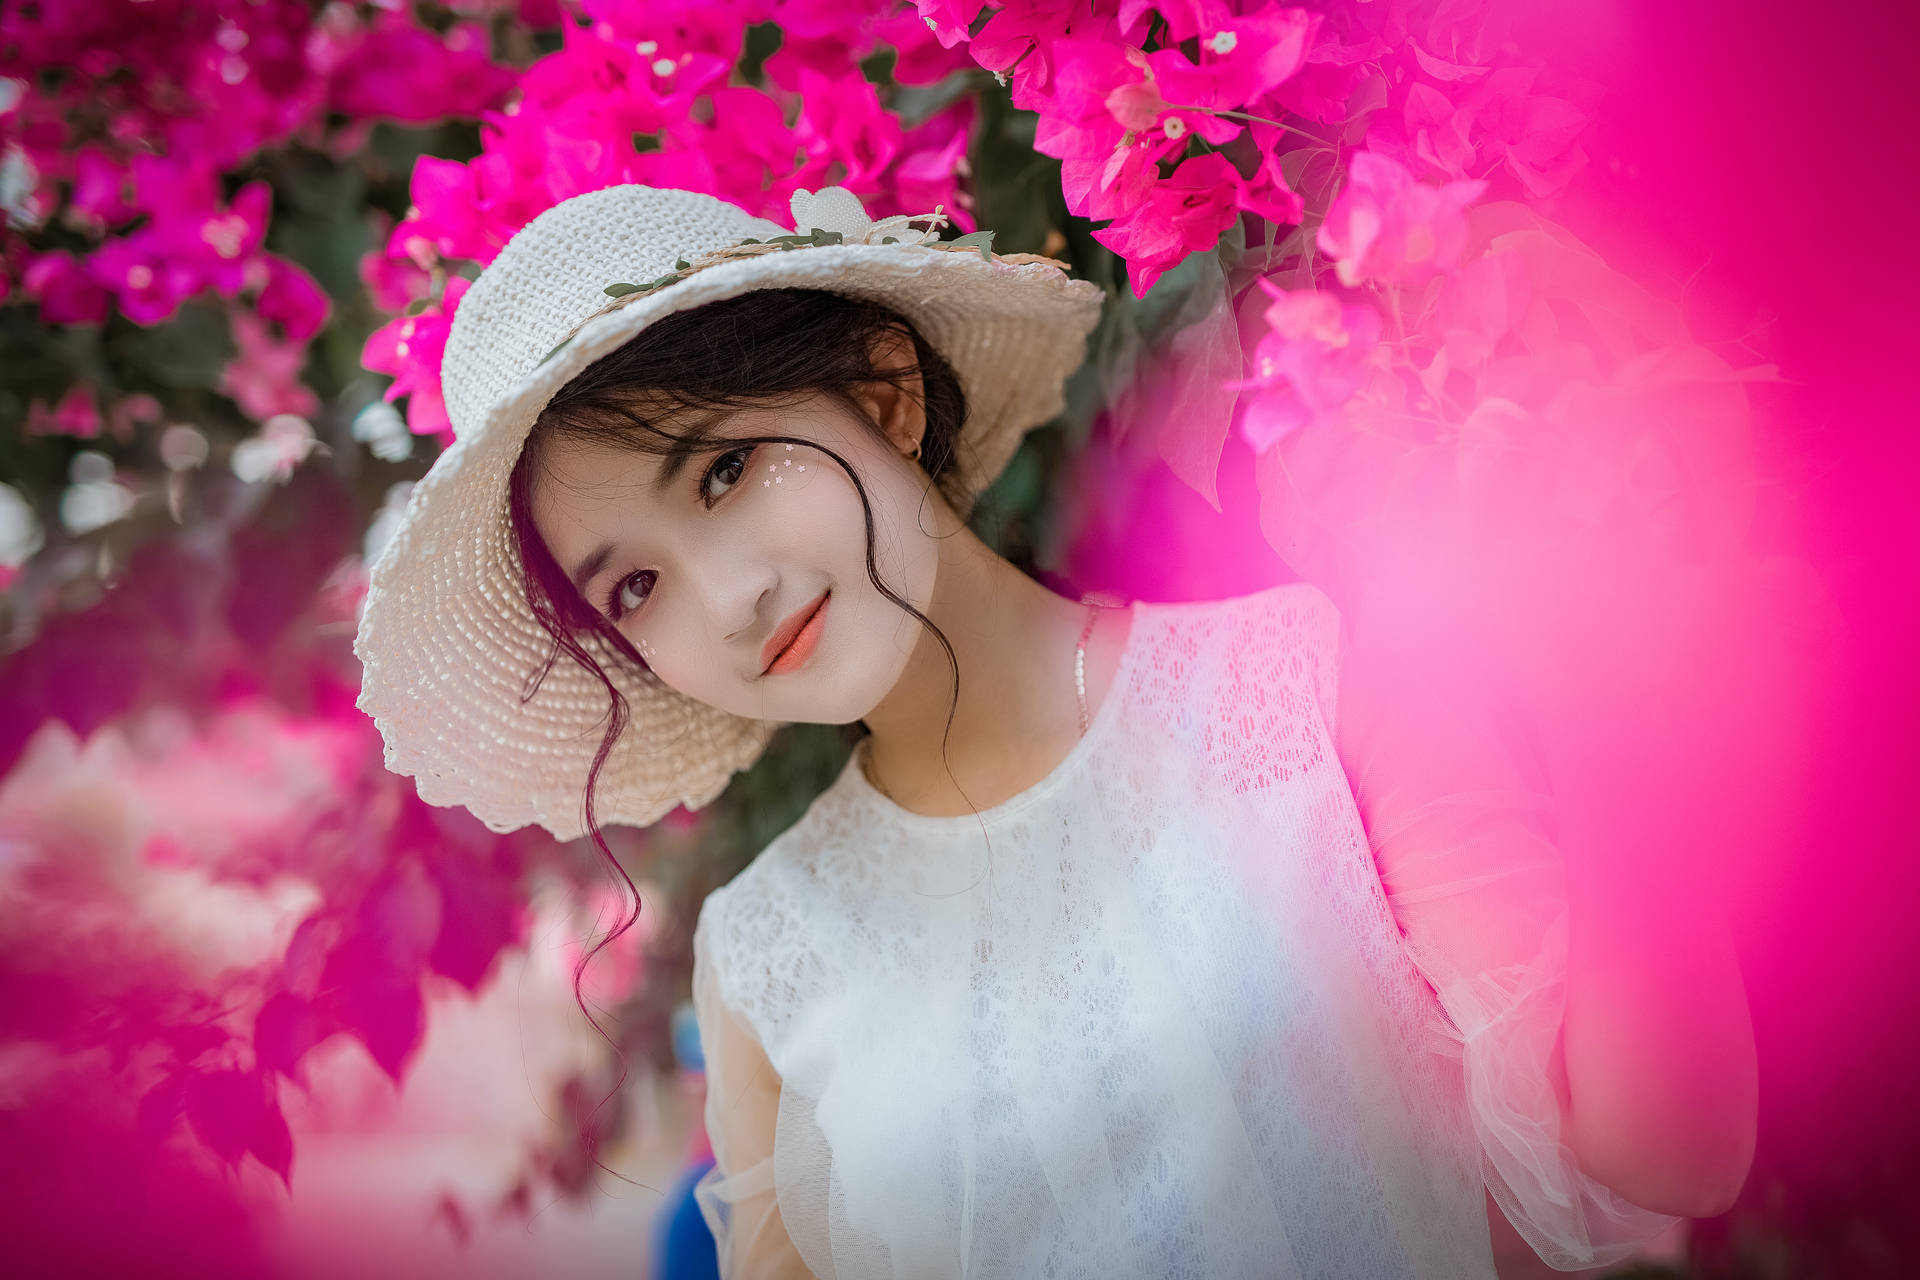 Elegance In Nature - Adorable Girl With Floral Hat